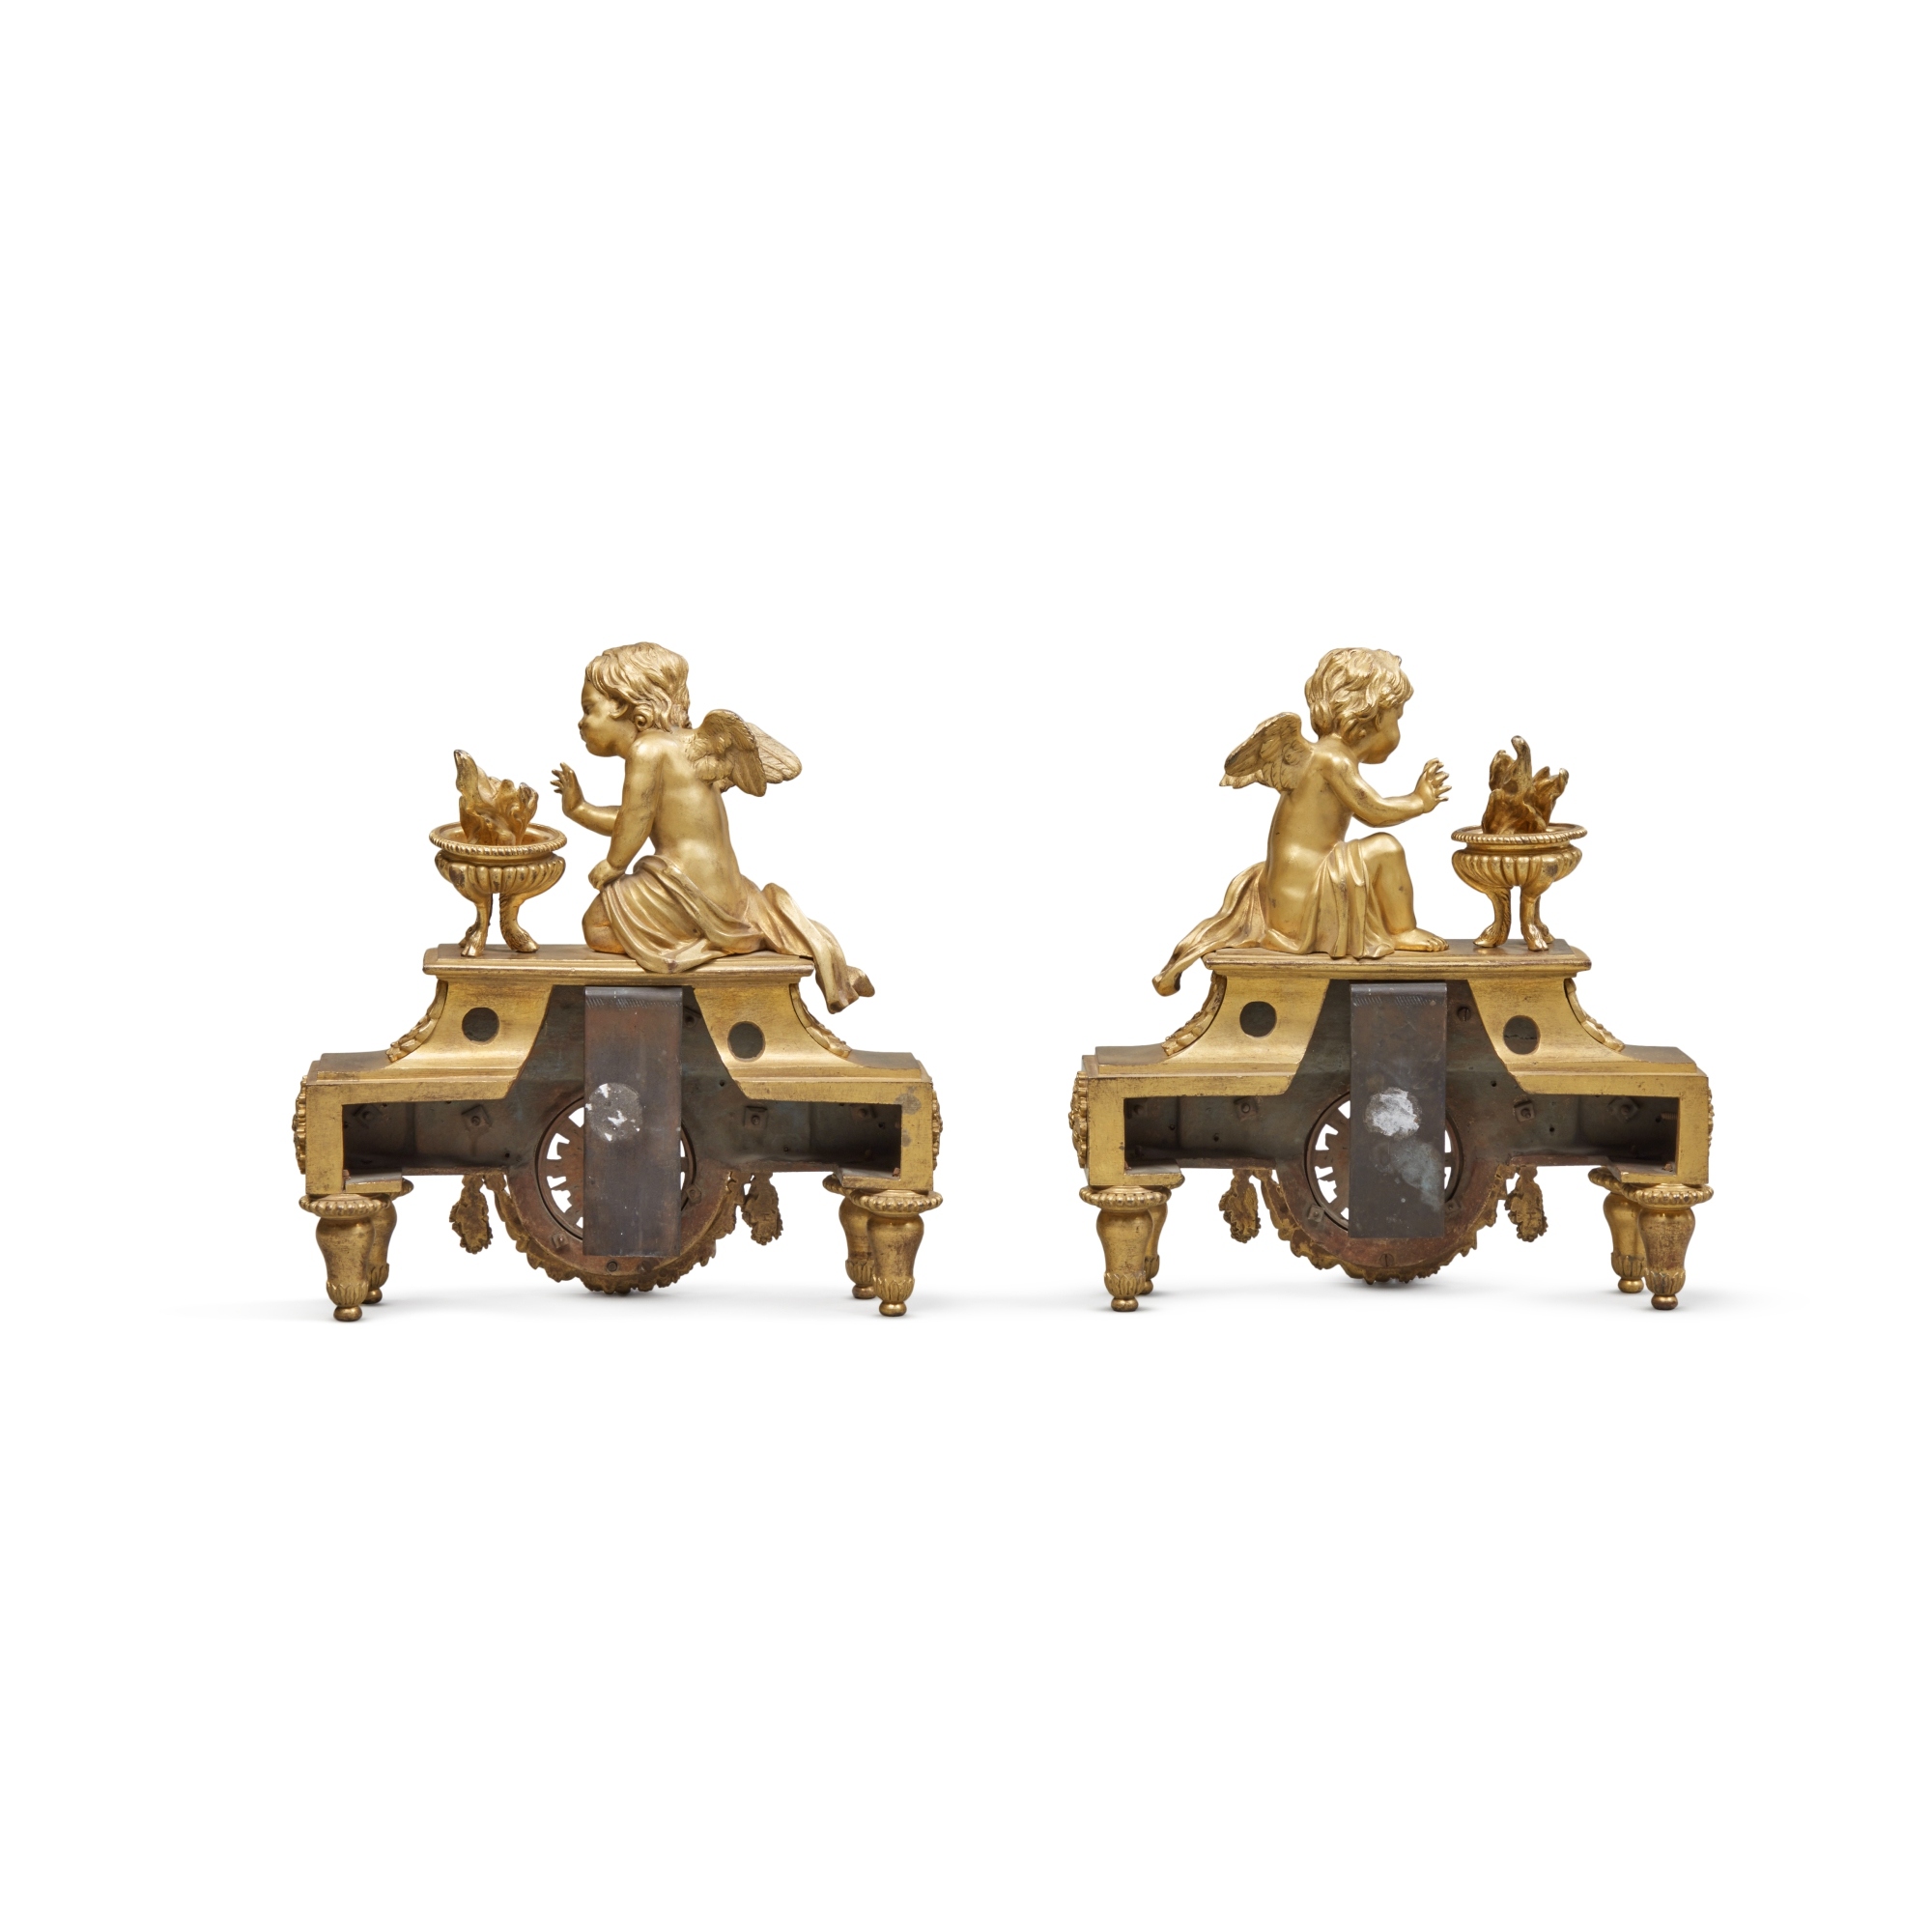 A Pair of Louis XVI Gilt Bronze Figural Chenets, Allegorical for Winter , Circa 1780 - Image 4 of 4